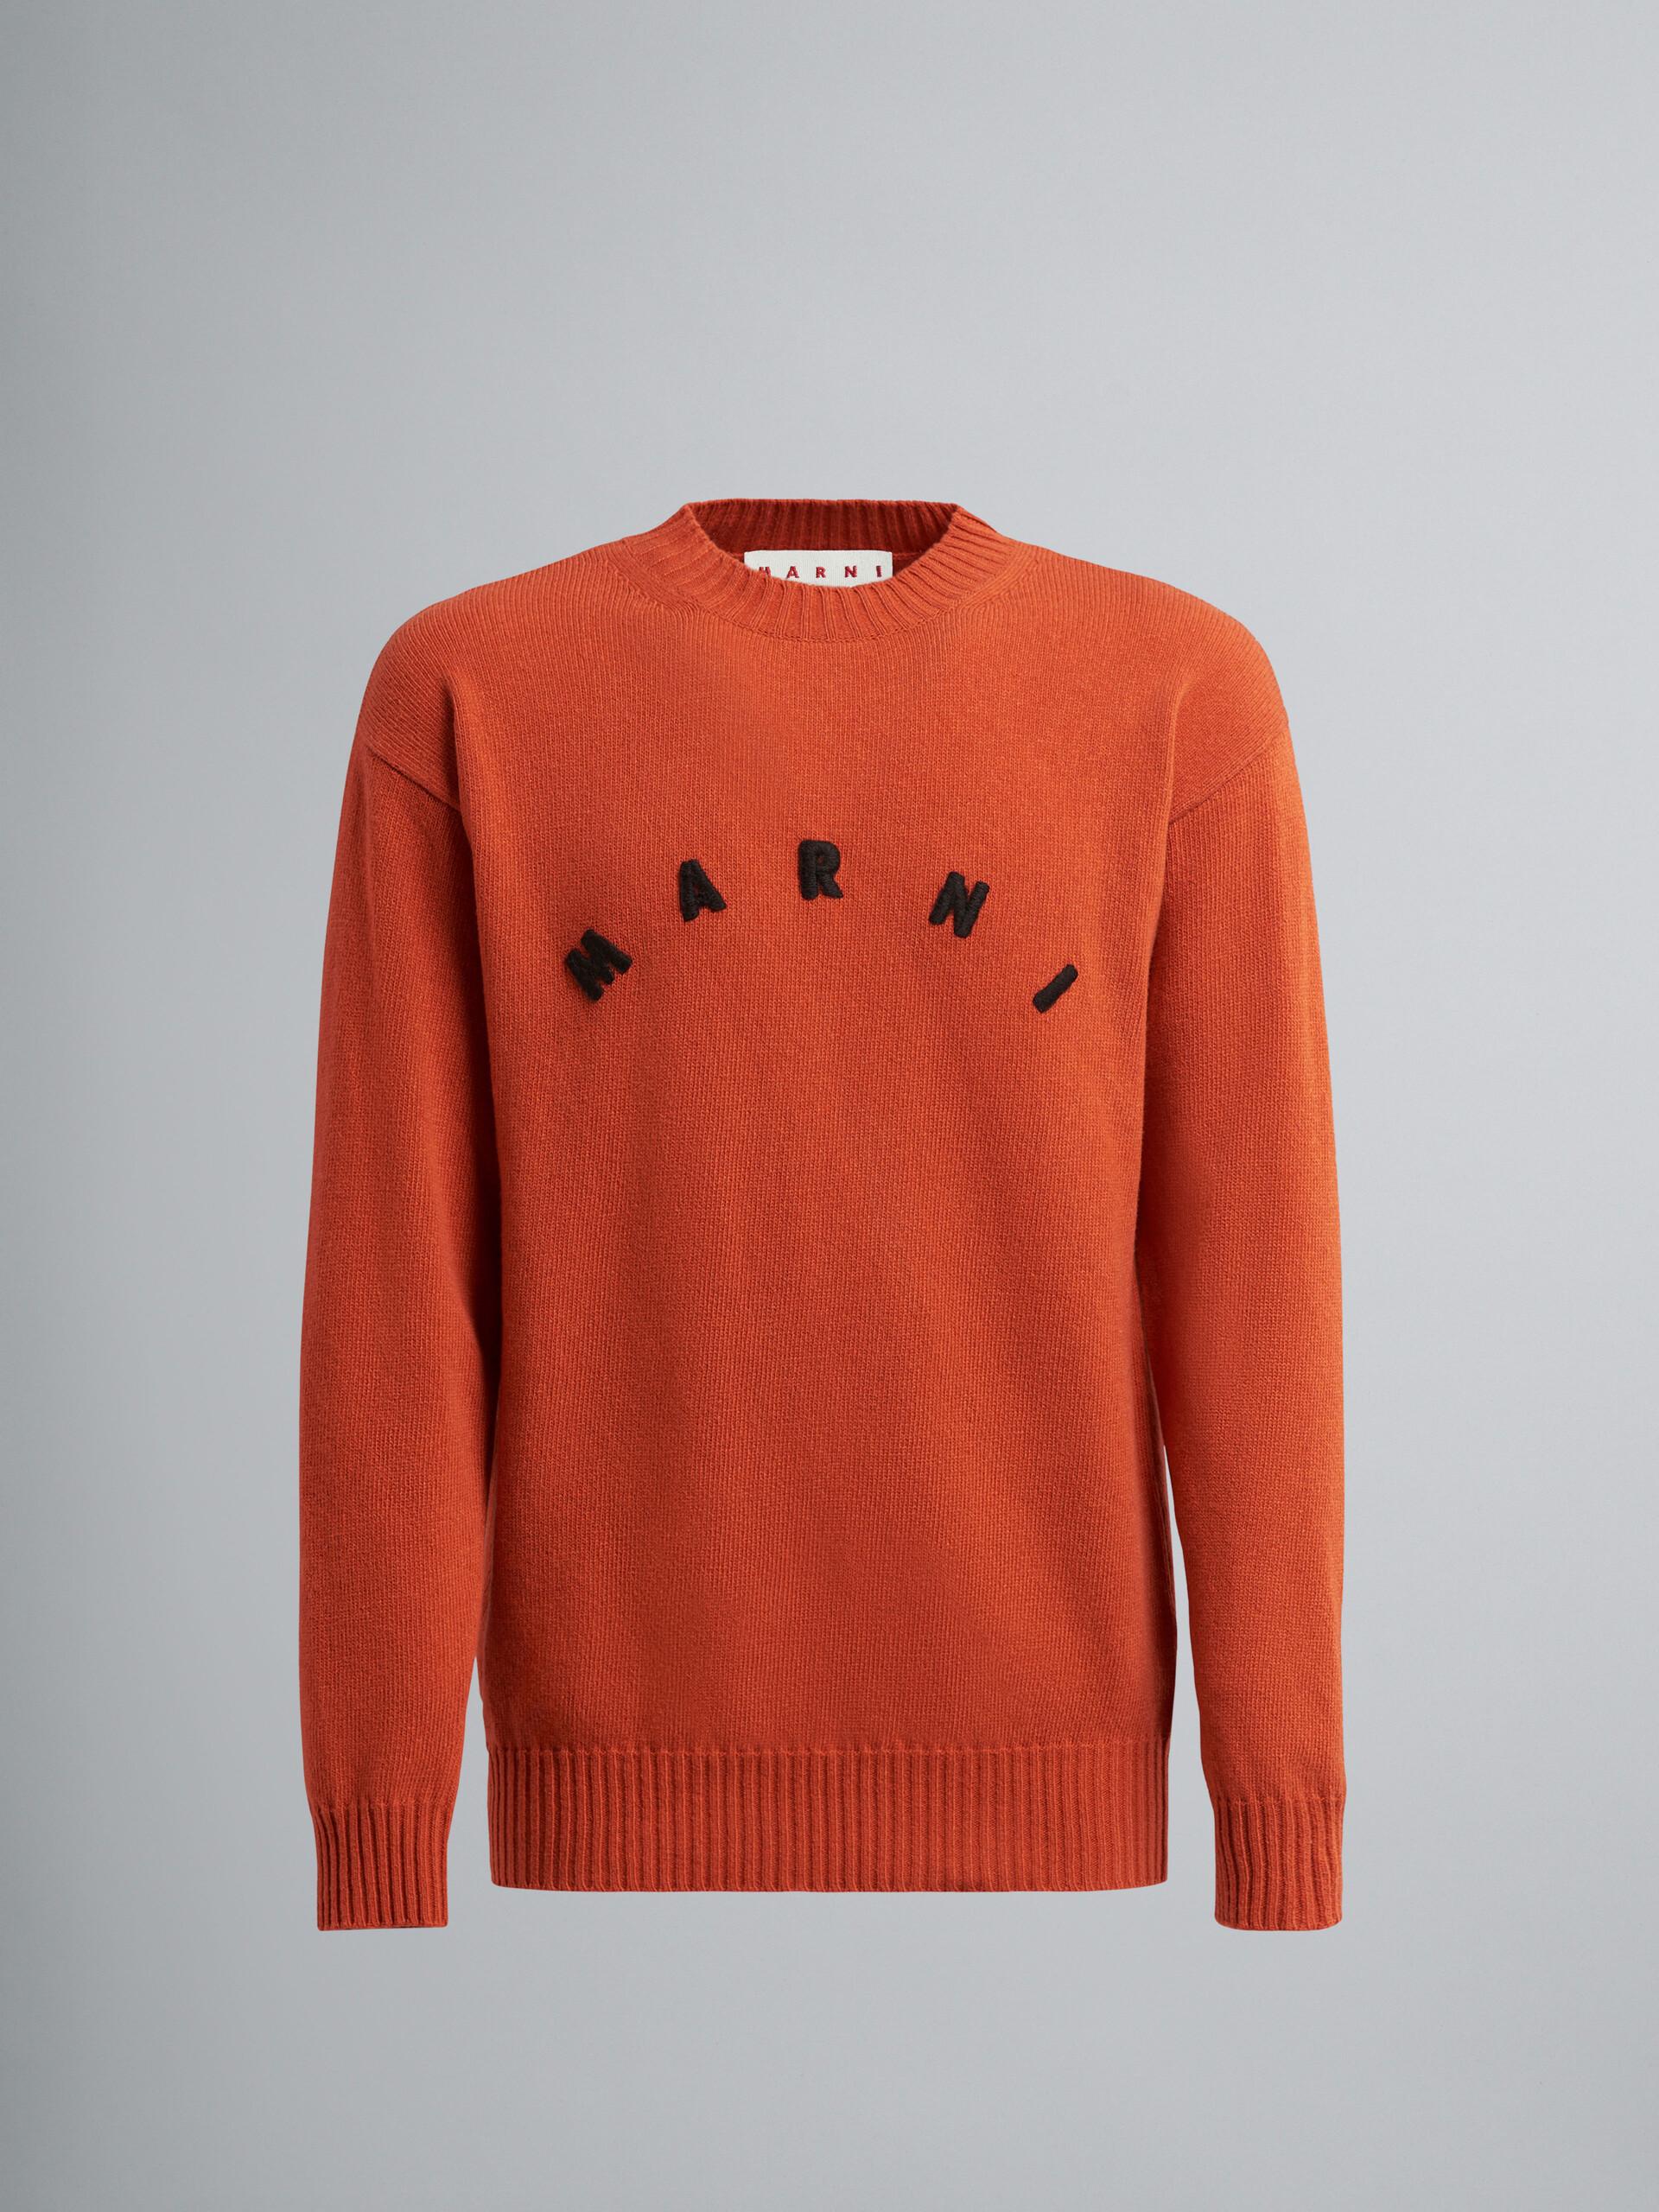 Orange recycled cashmere sweater - Pullovers - Image 1